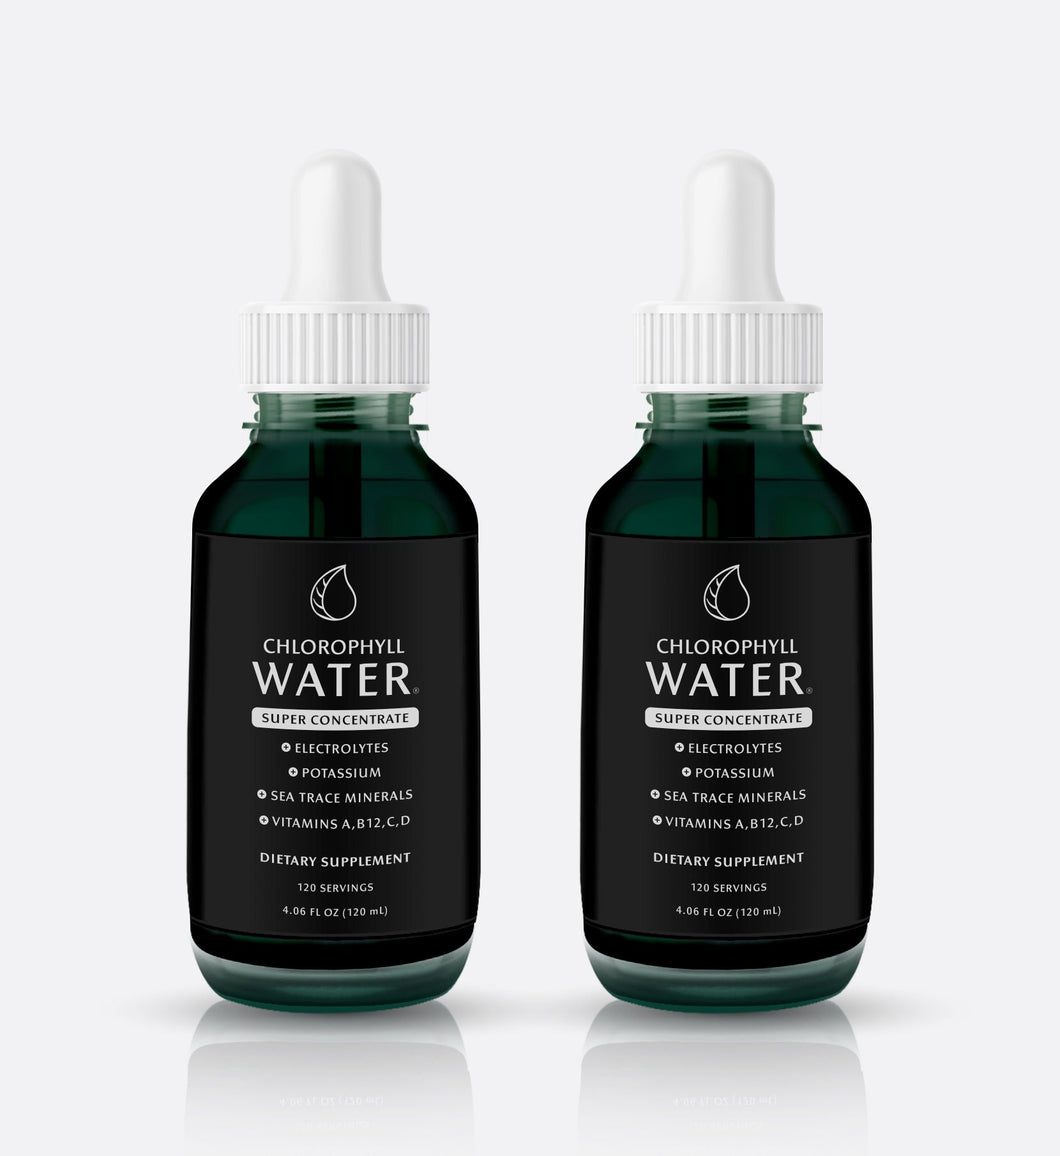 Chlorophyll Water - 2 Pack: Chlorophyll Water Drops: SUPER CONCENTRATE Liquid Chlorophyll (240 Servings) with Electrolytes and Vitamins by Chlorophyll Water - | Delivery near me in ... Farm2Me #url#